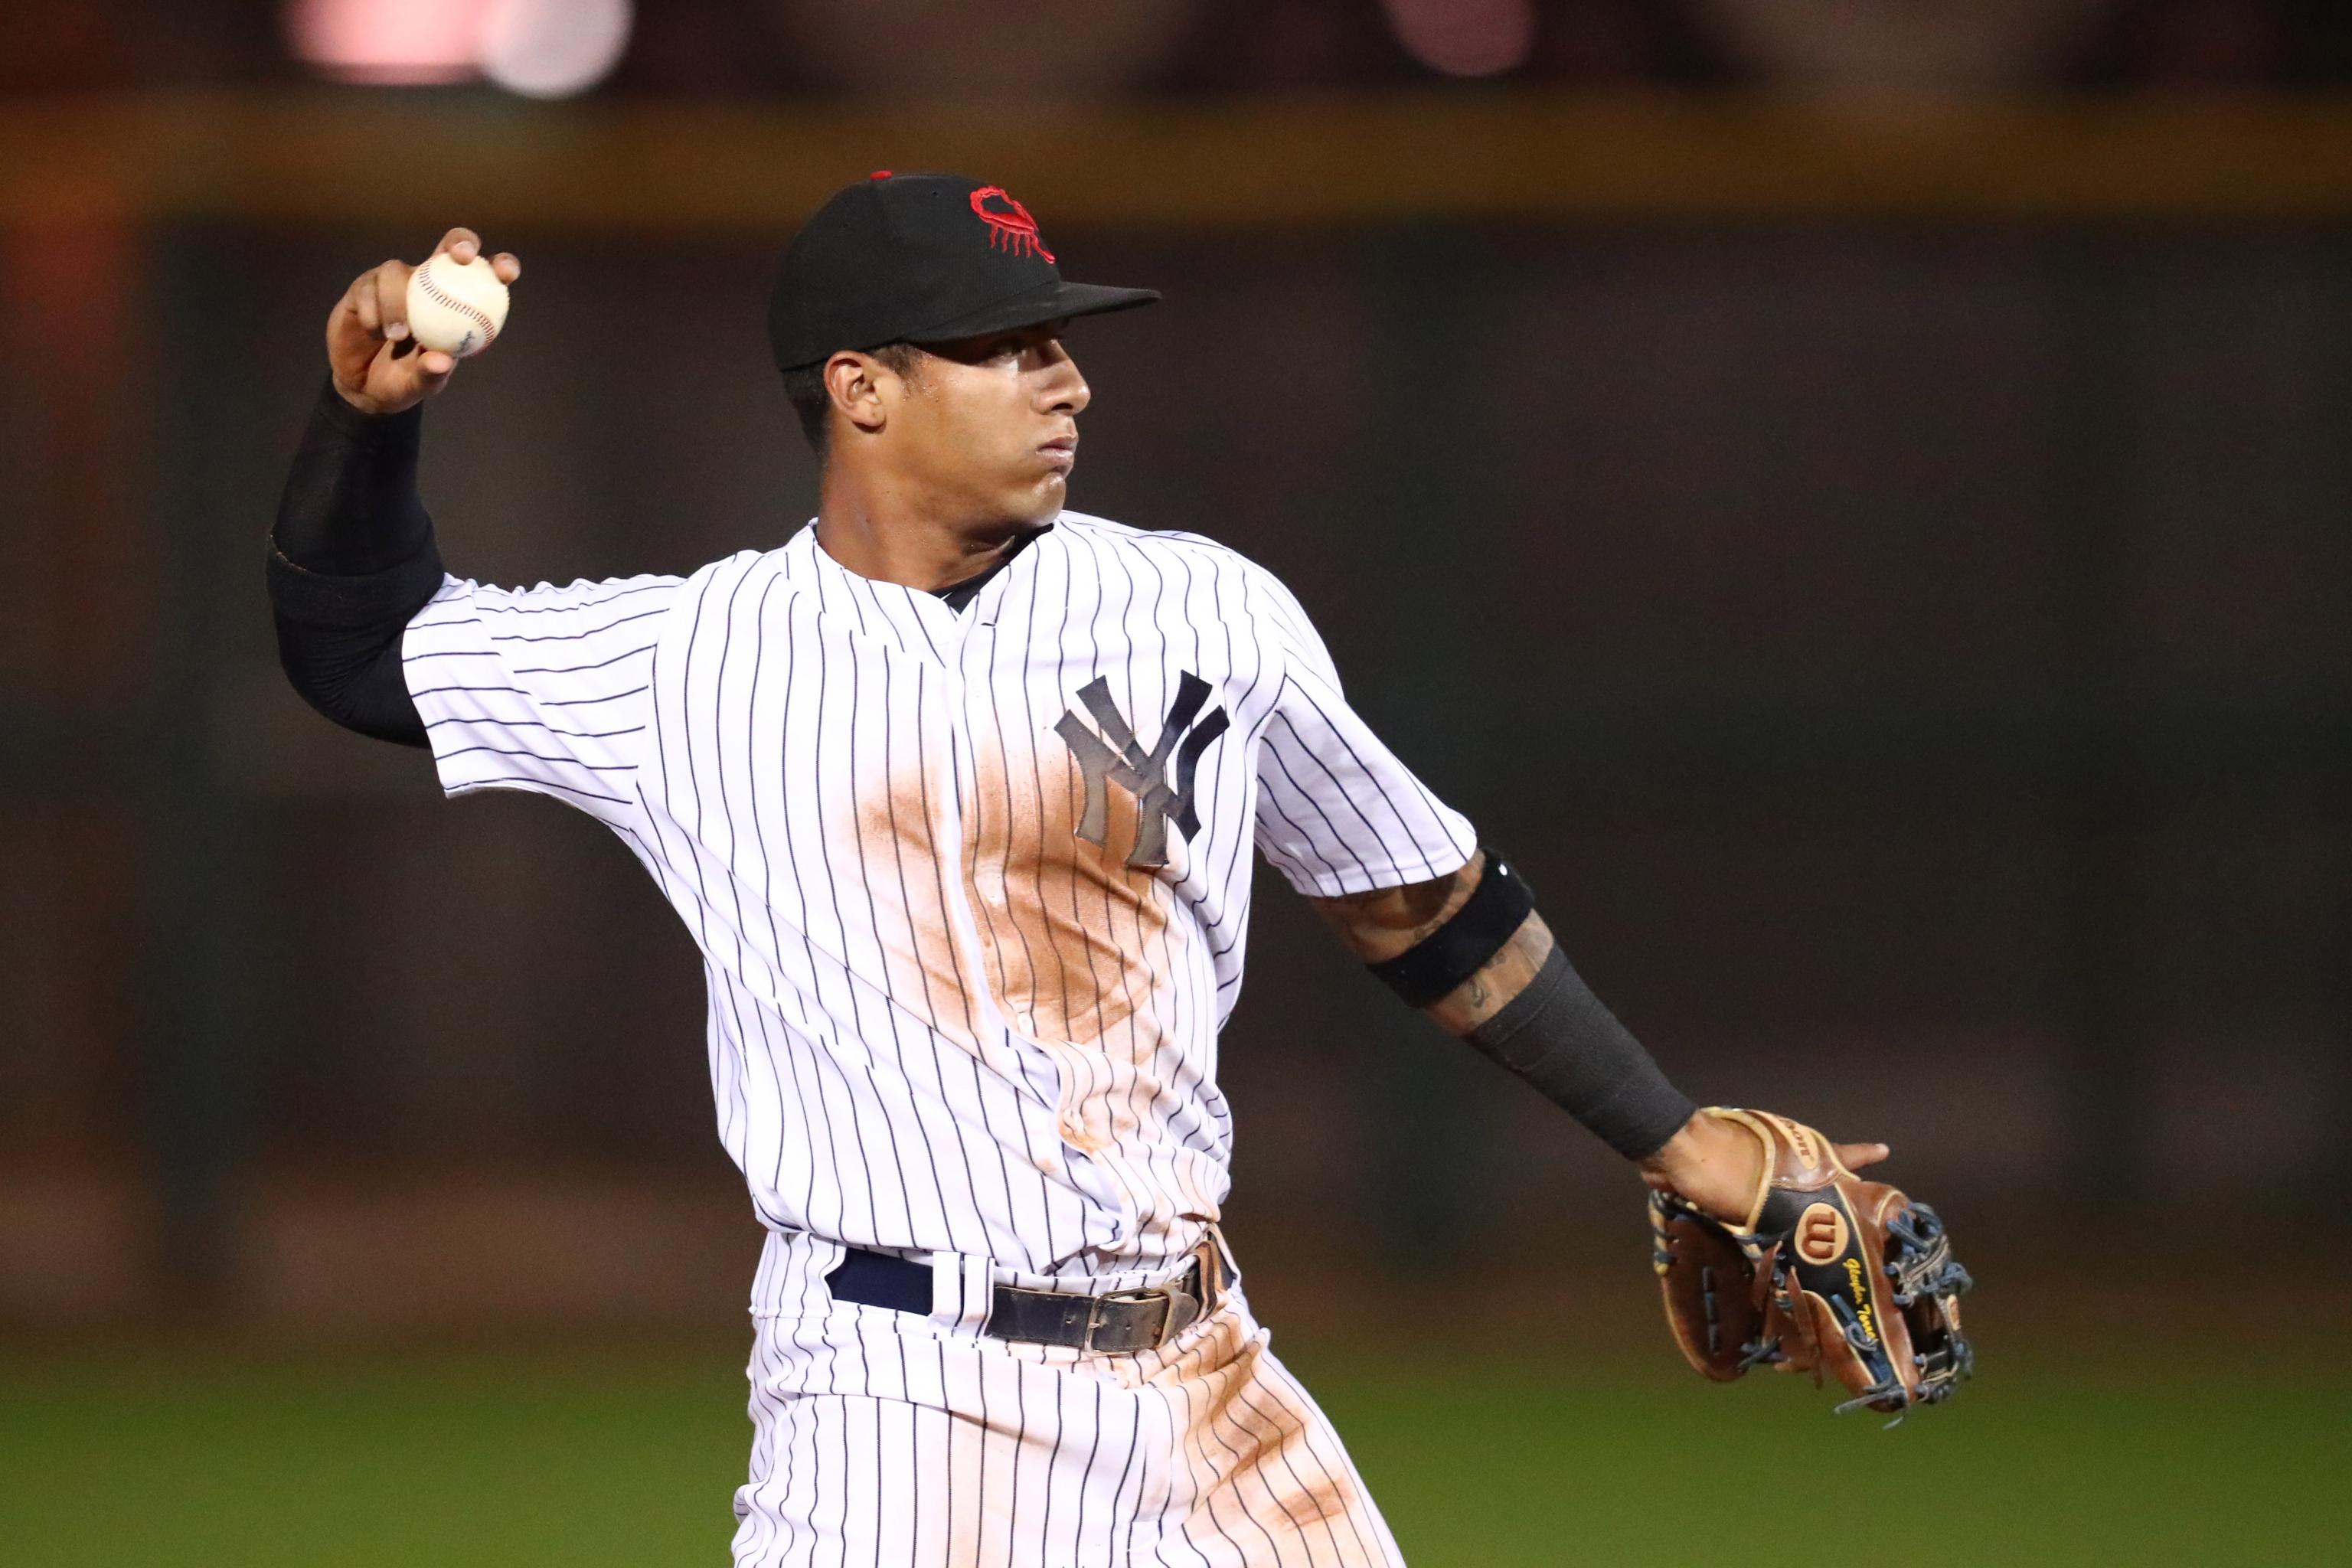 The next MLB superstar? Yankees' Gleyber Torres is ready to own